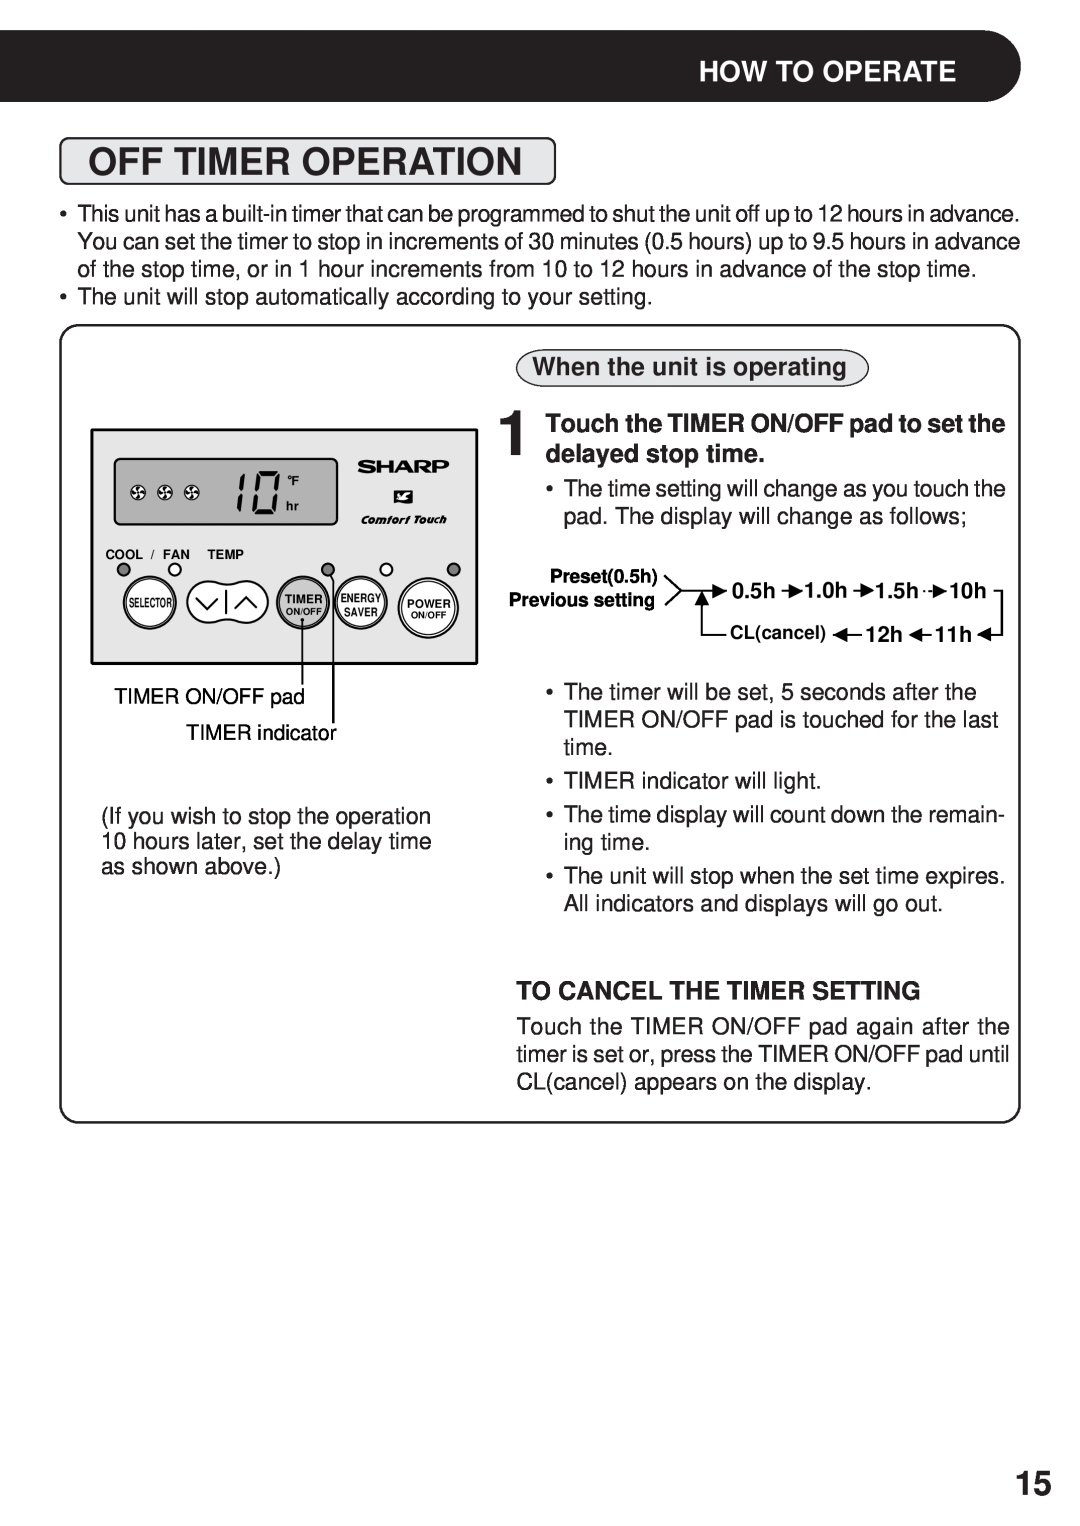 Sharp AF-R80CX, AF-R85CX Off Timer Operation, When the unit is operating, How To Operate, To Cancel The Timer Setting 